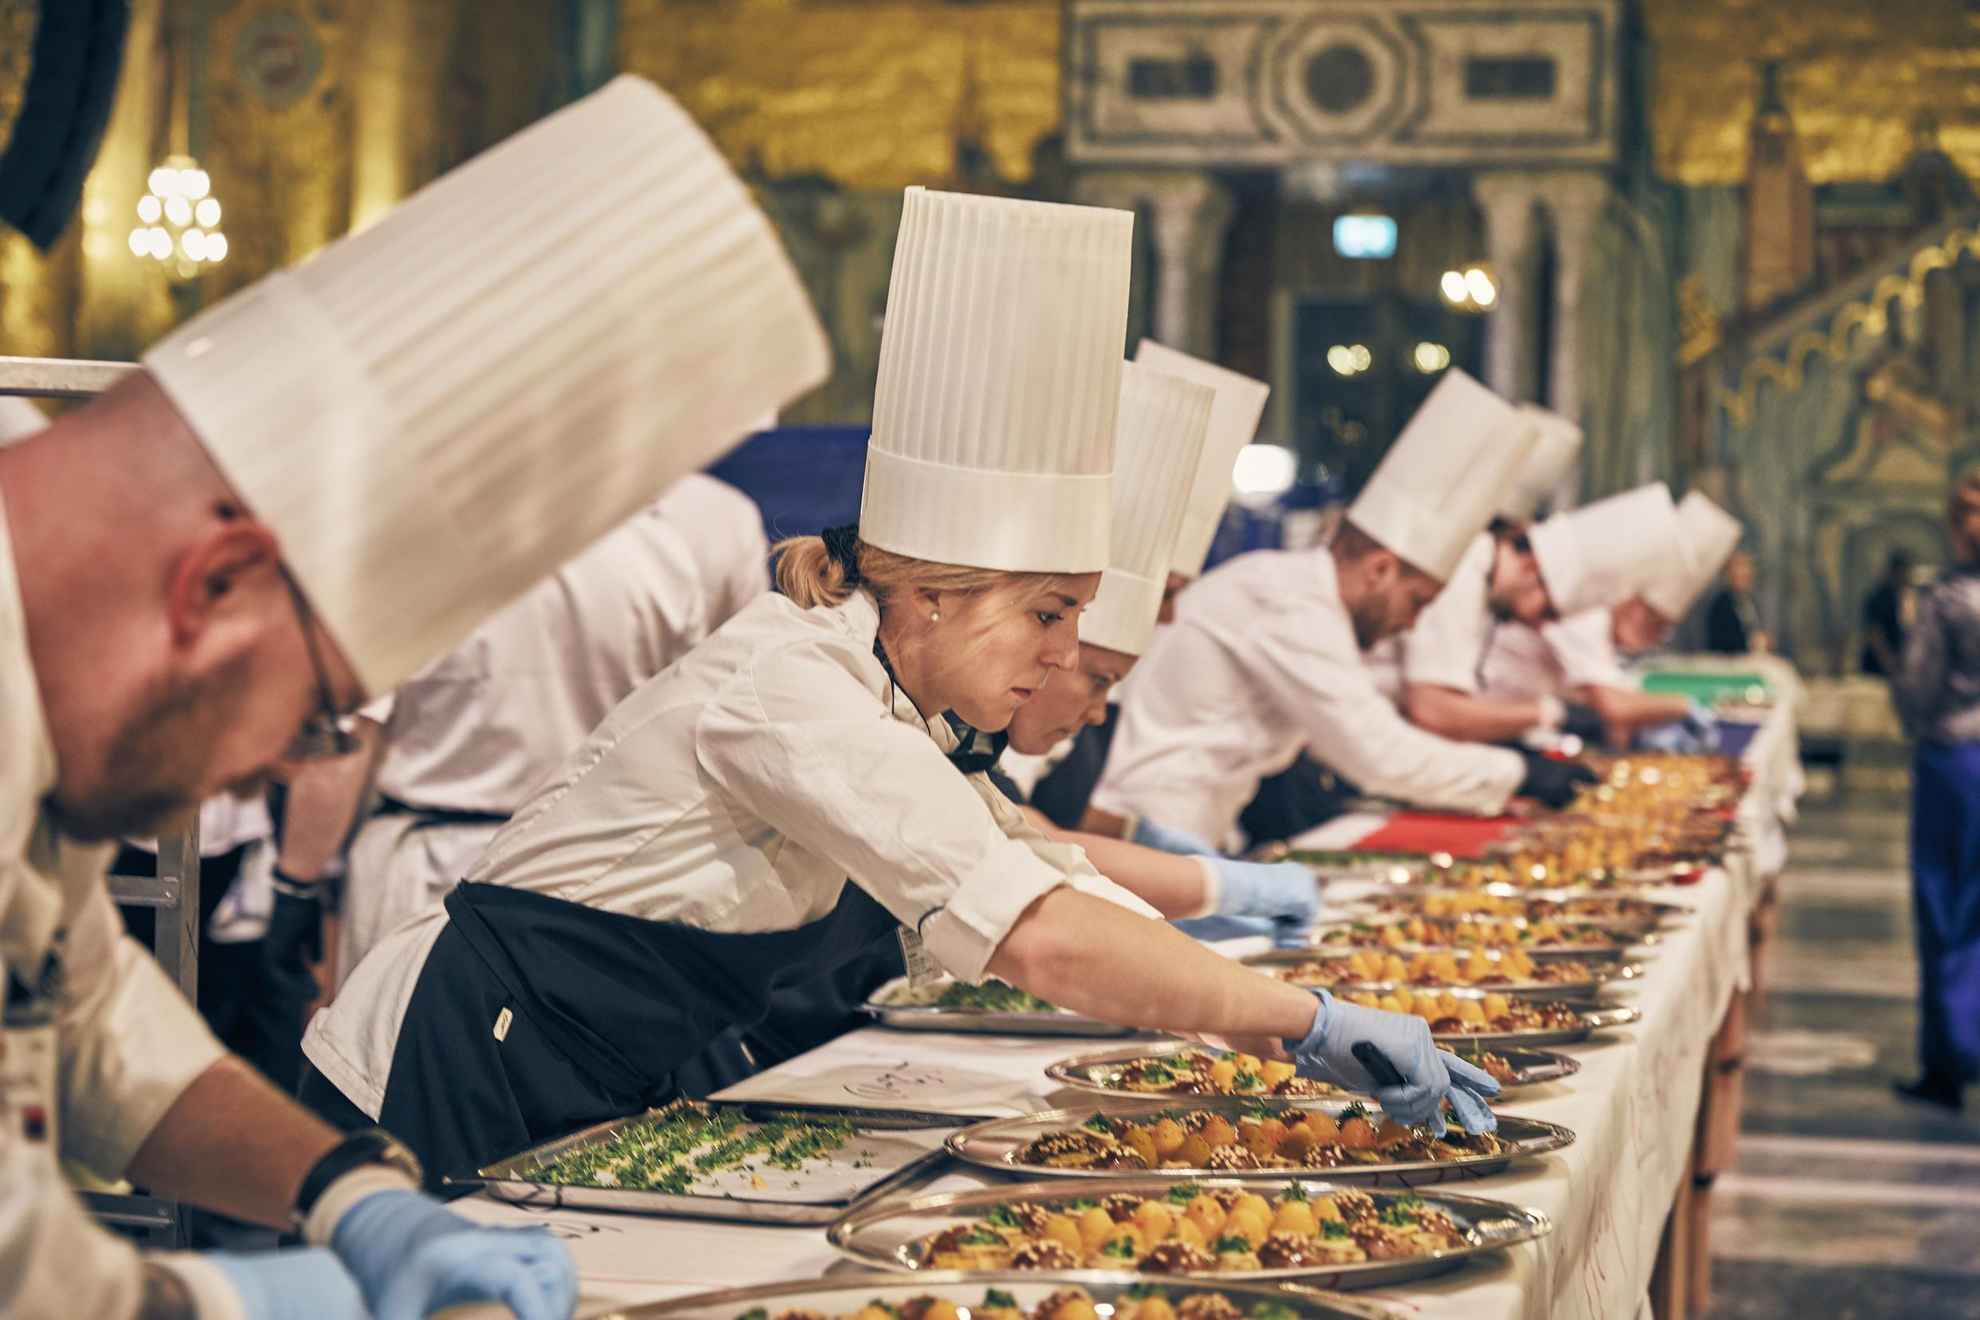 Chefs are standing on a row plating food.